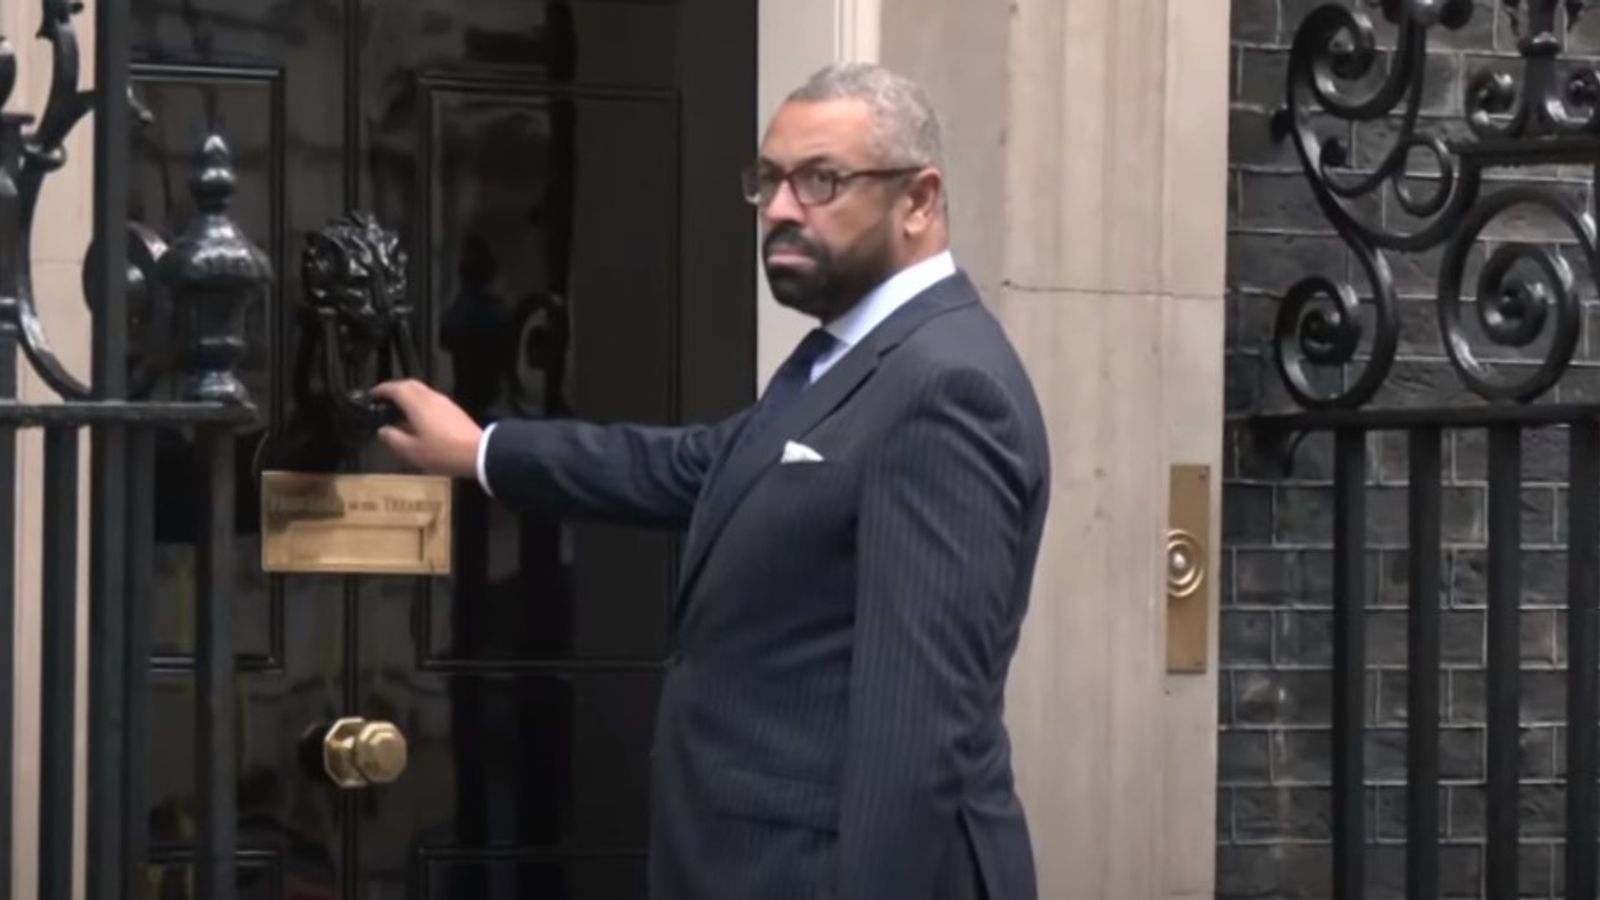 James Cleverly admits calling MP 's***' - but denies calling Stockton-on-Tees a 's***hole', source says